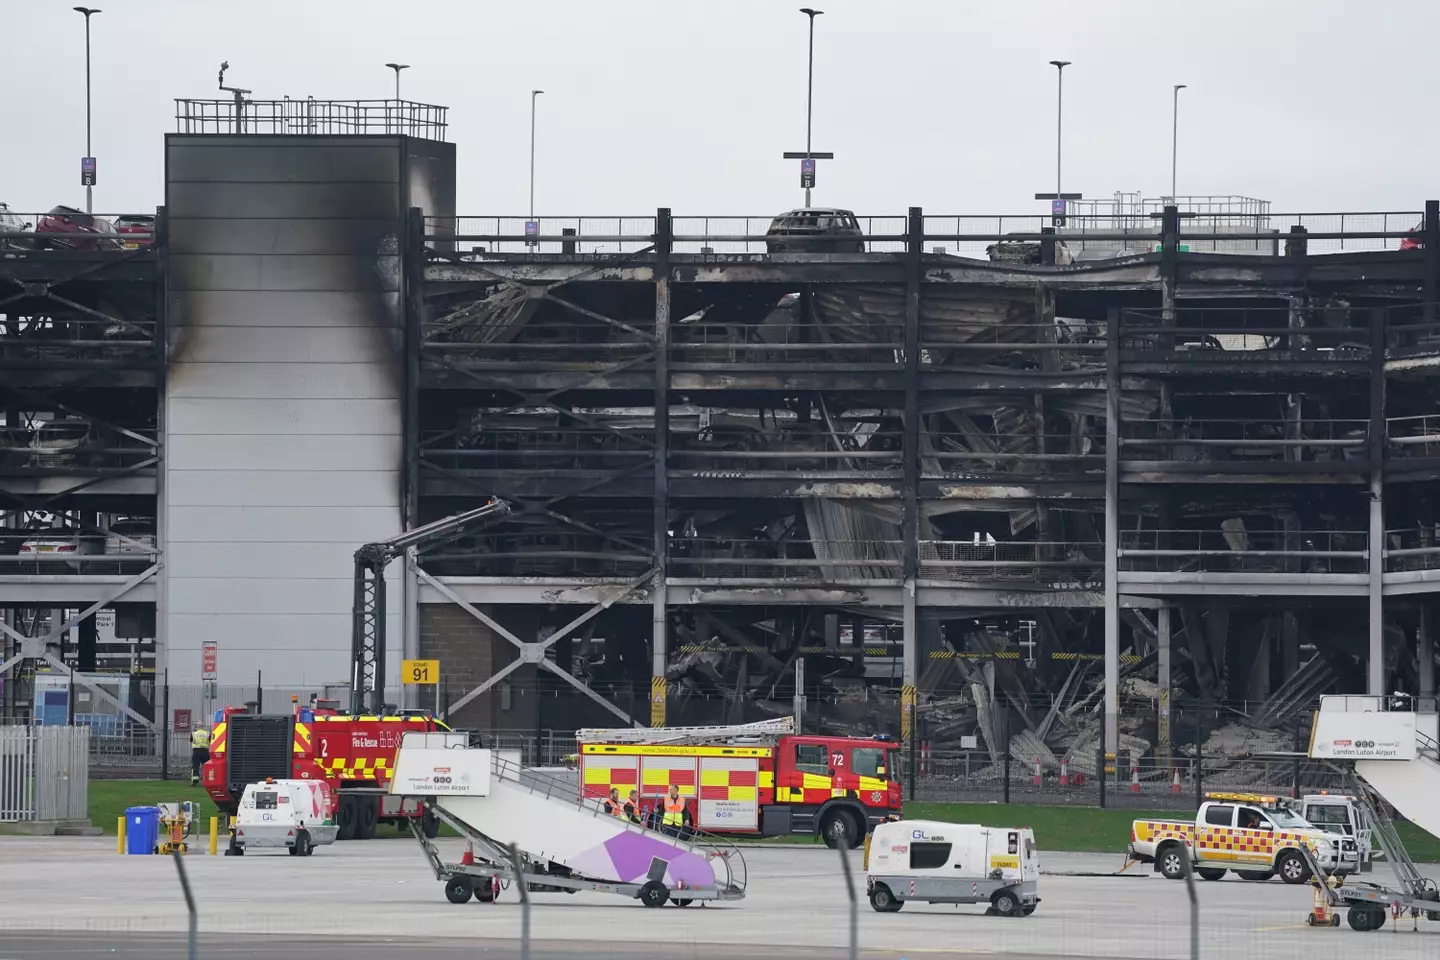 More than 100 firefighters were sent to tackle the fire at Luton Airport.